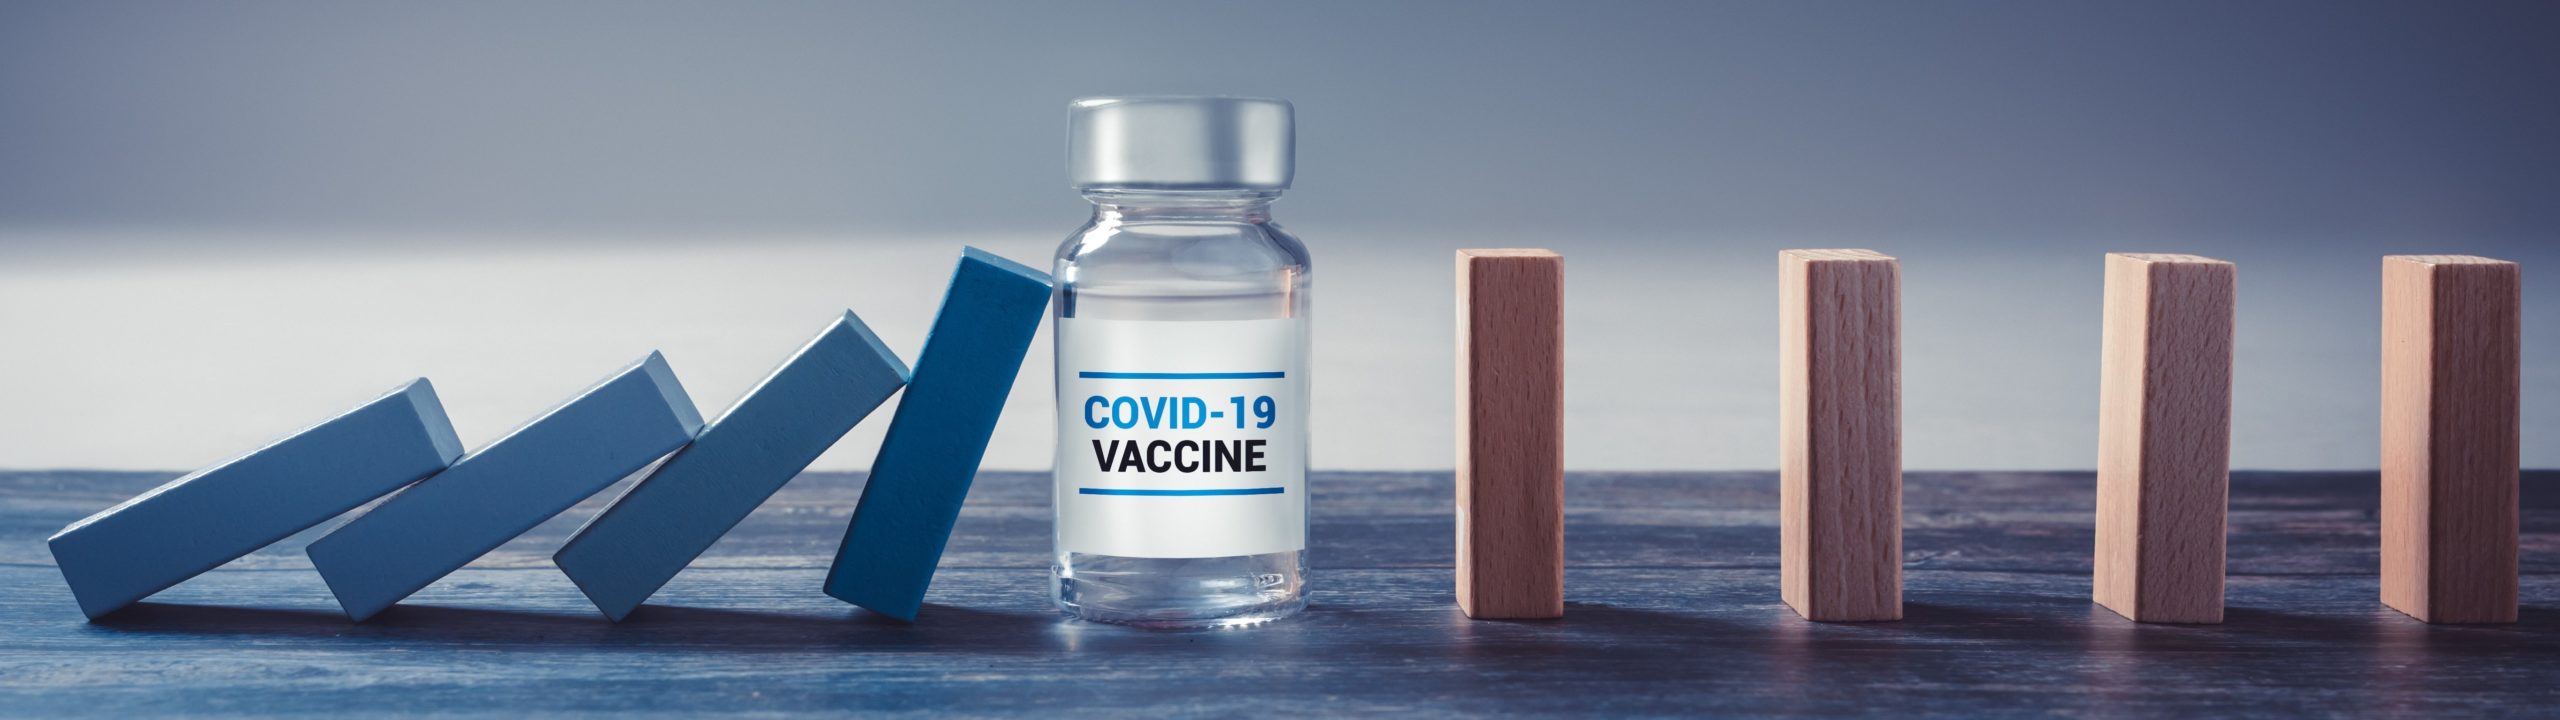 EEOC Gives Green Light to Employer Covid-19 Vaccine Incentives